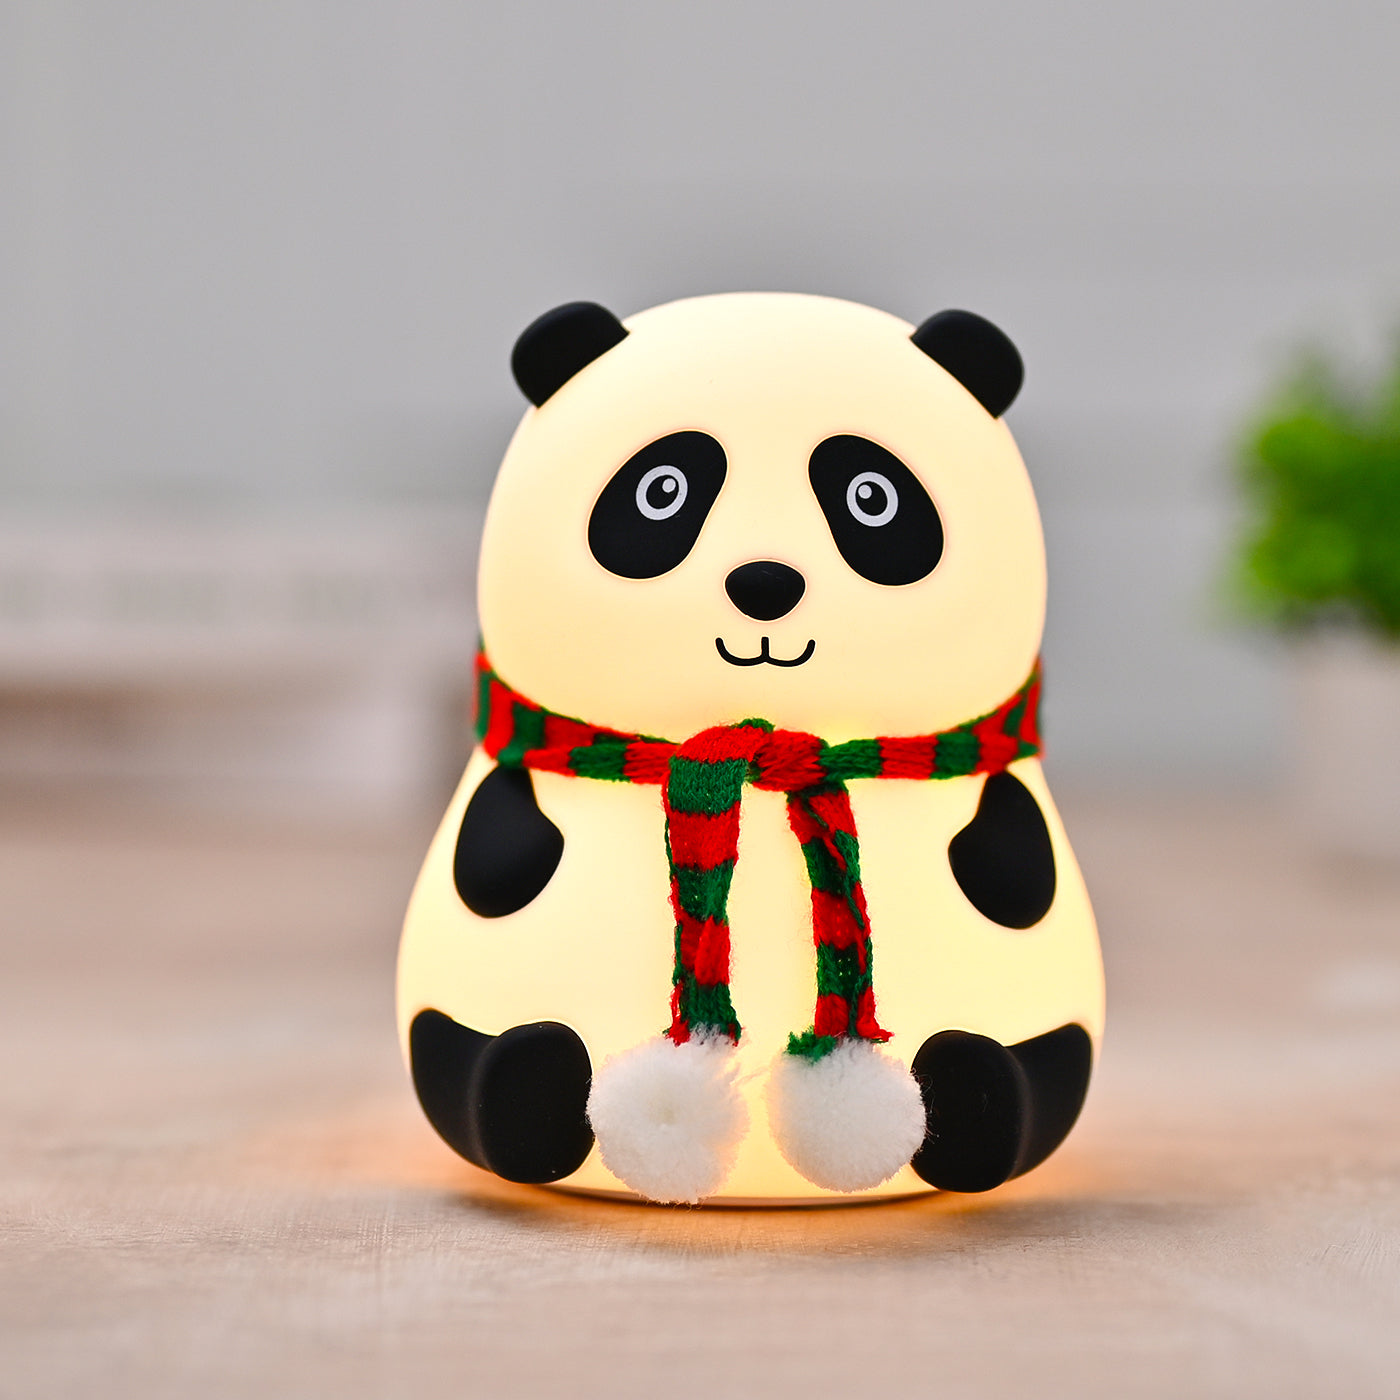 Silicone Panda Night Lamp for children | Bedroom | Christmas Gift | Tap Lamp | Multiple Colors